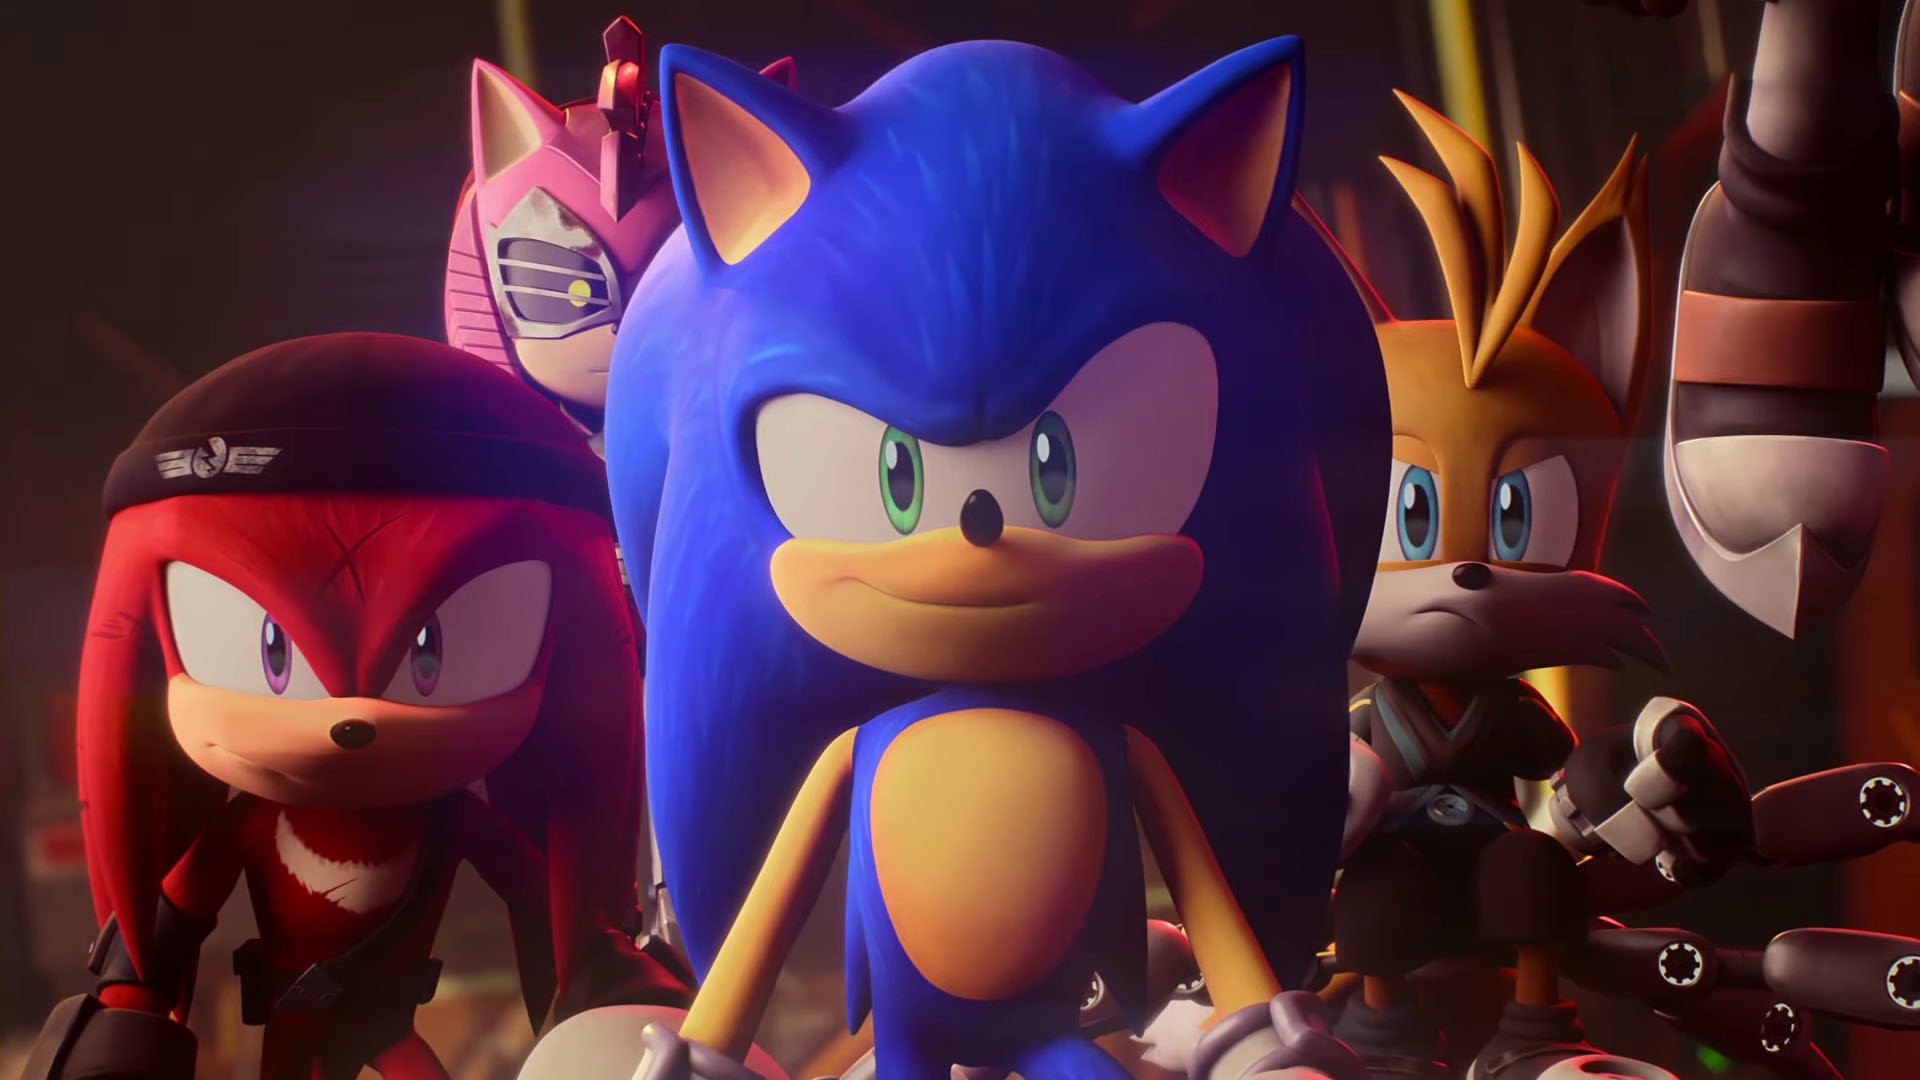 Sonic Forces News on X: A new Sonic Prime Dash update was released. You  can download it now! This update adds Knuckles the Dread, the event starts  tomorrow! It also added a